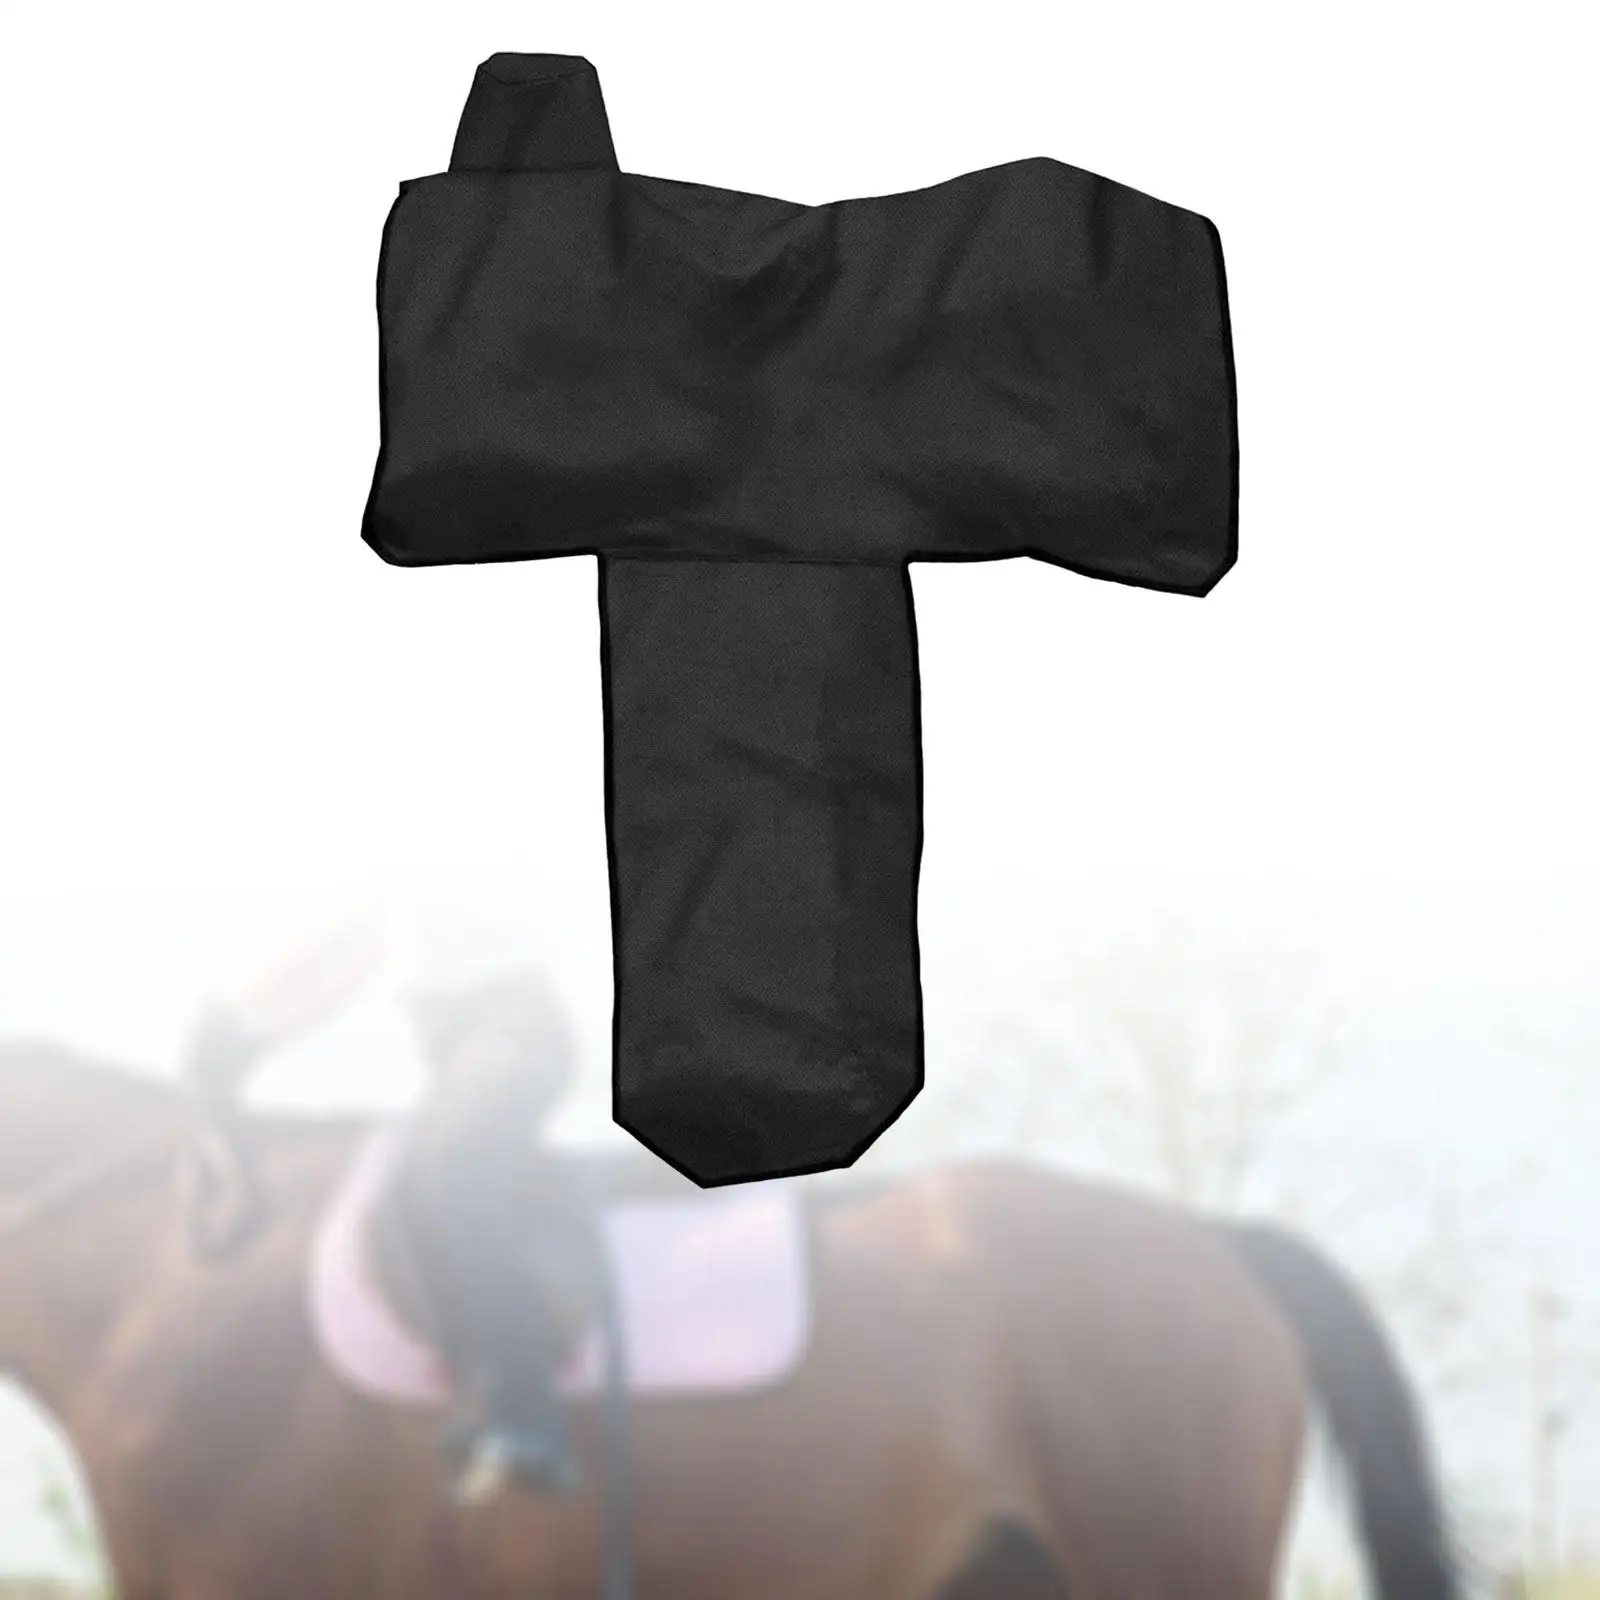 Saddle Covers ,Western Horse Lightweight Practical Waterproof Black Protective